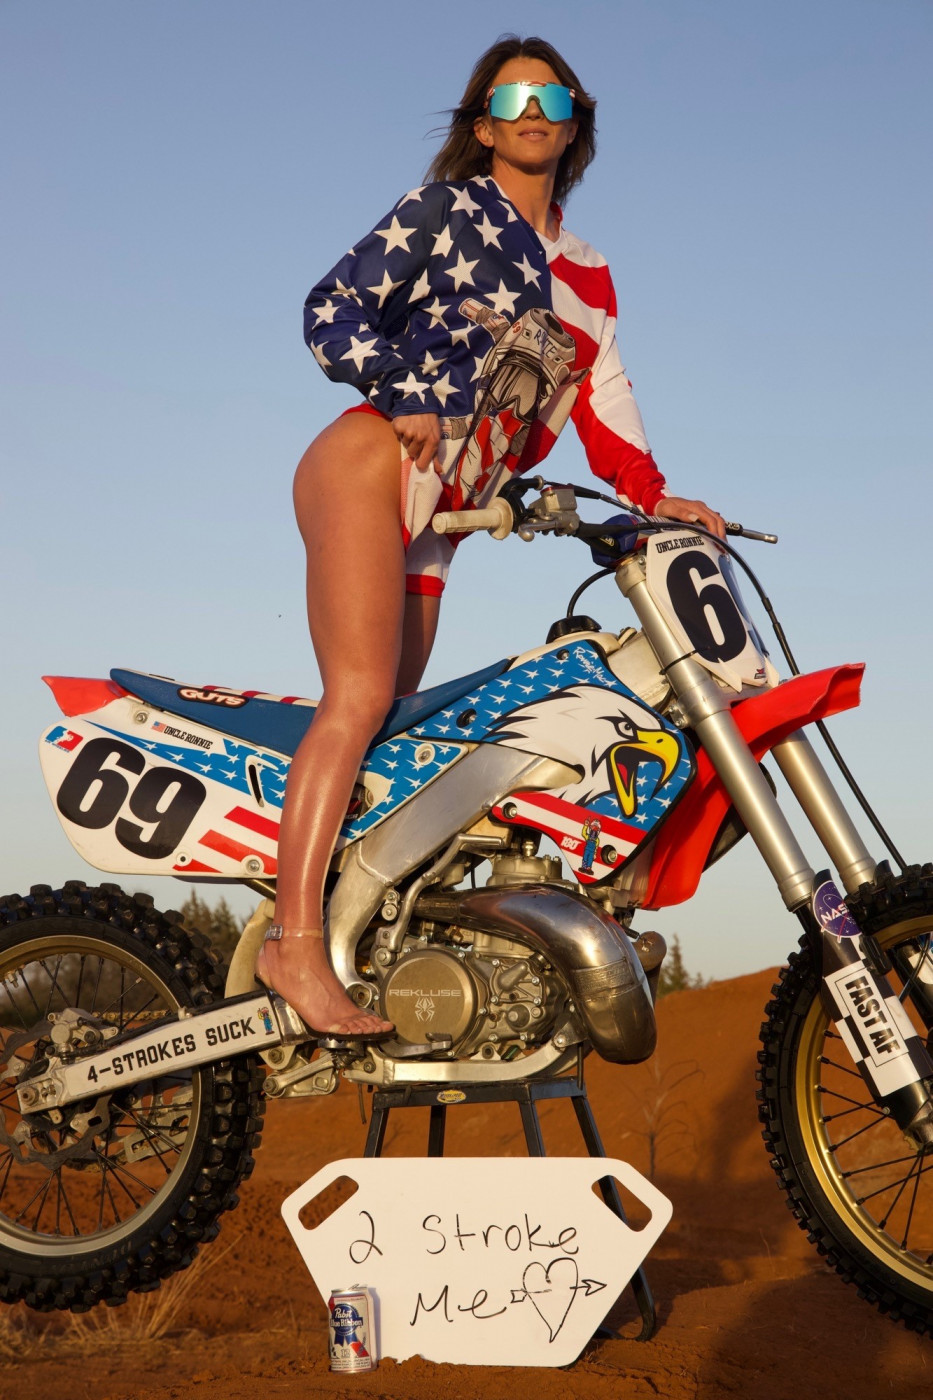 What new merchandise and products are coming to ronniemac69.com